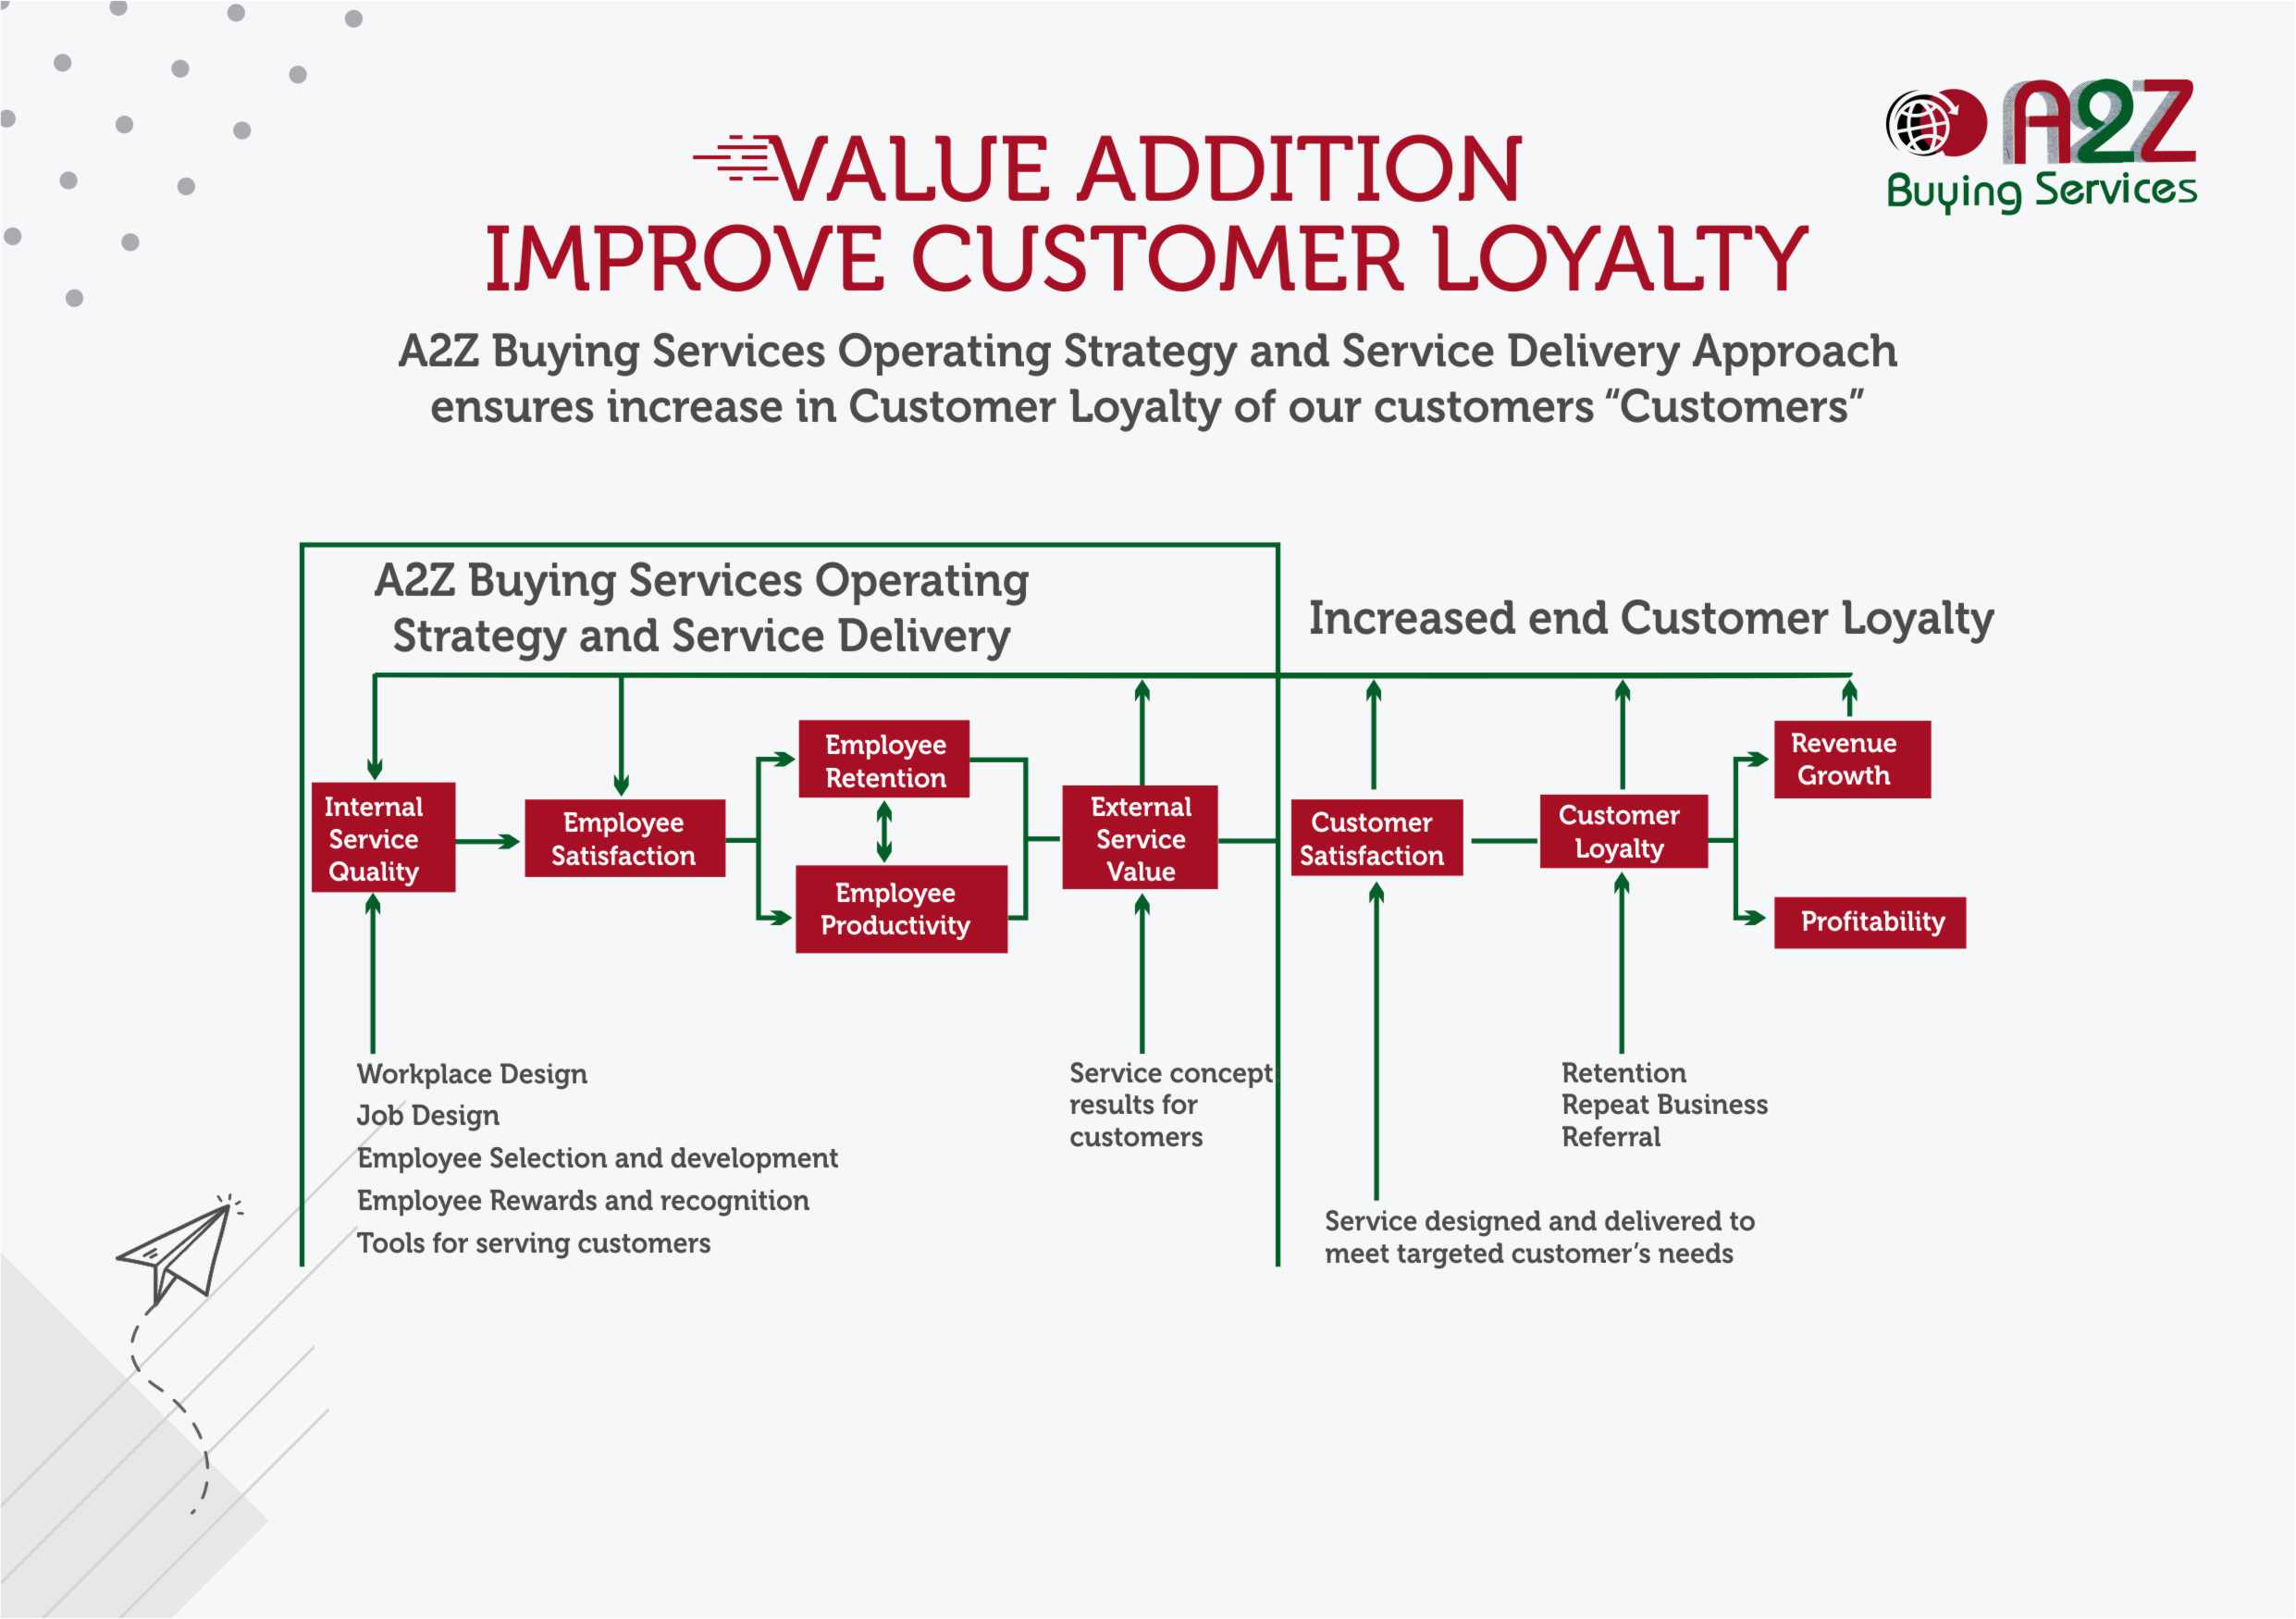 Value Addition | A2Z Buying Services